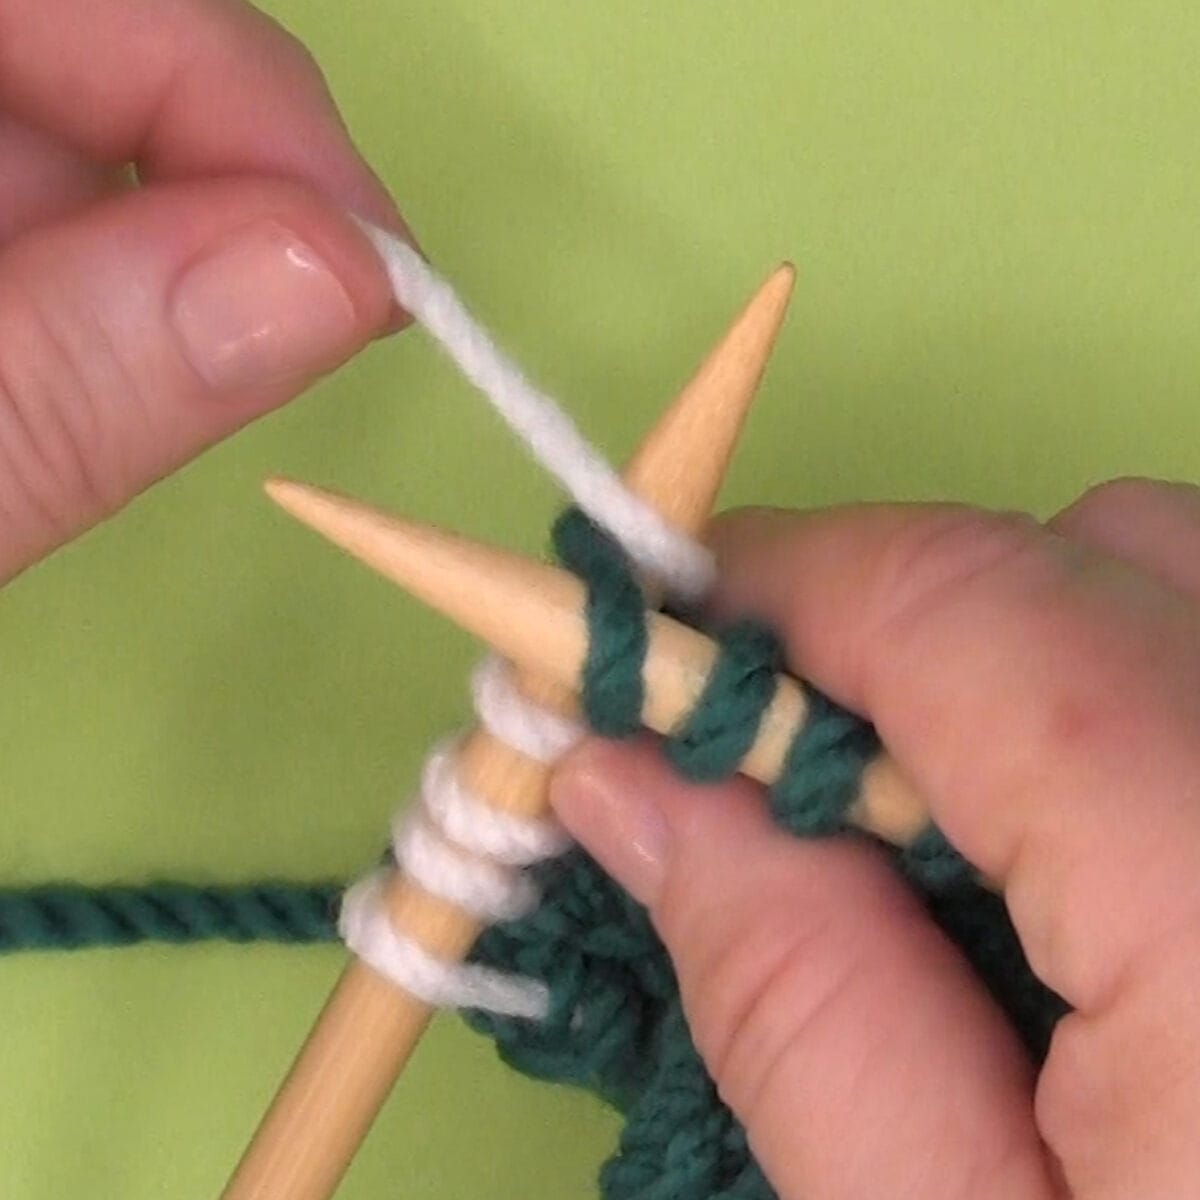 Left-handed demonstration of wrapping yarn counterclockwise around needle.